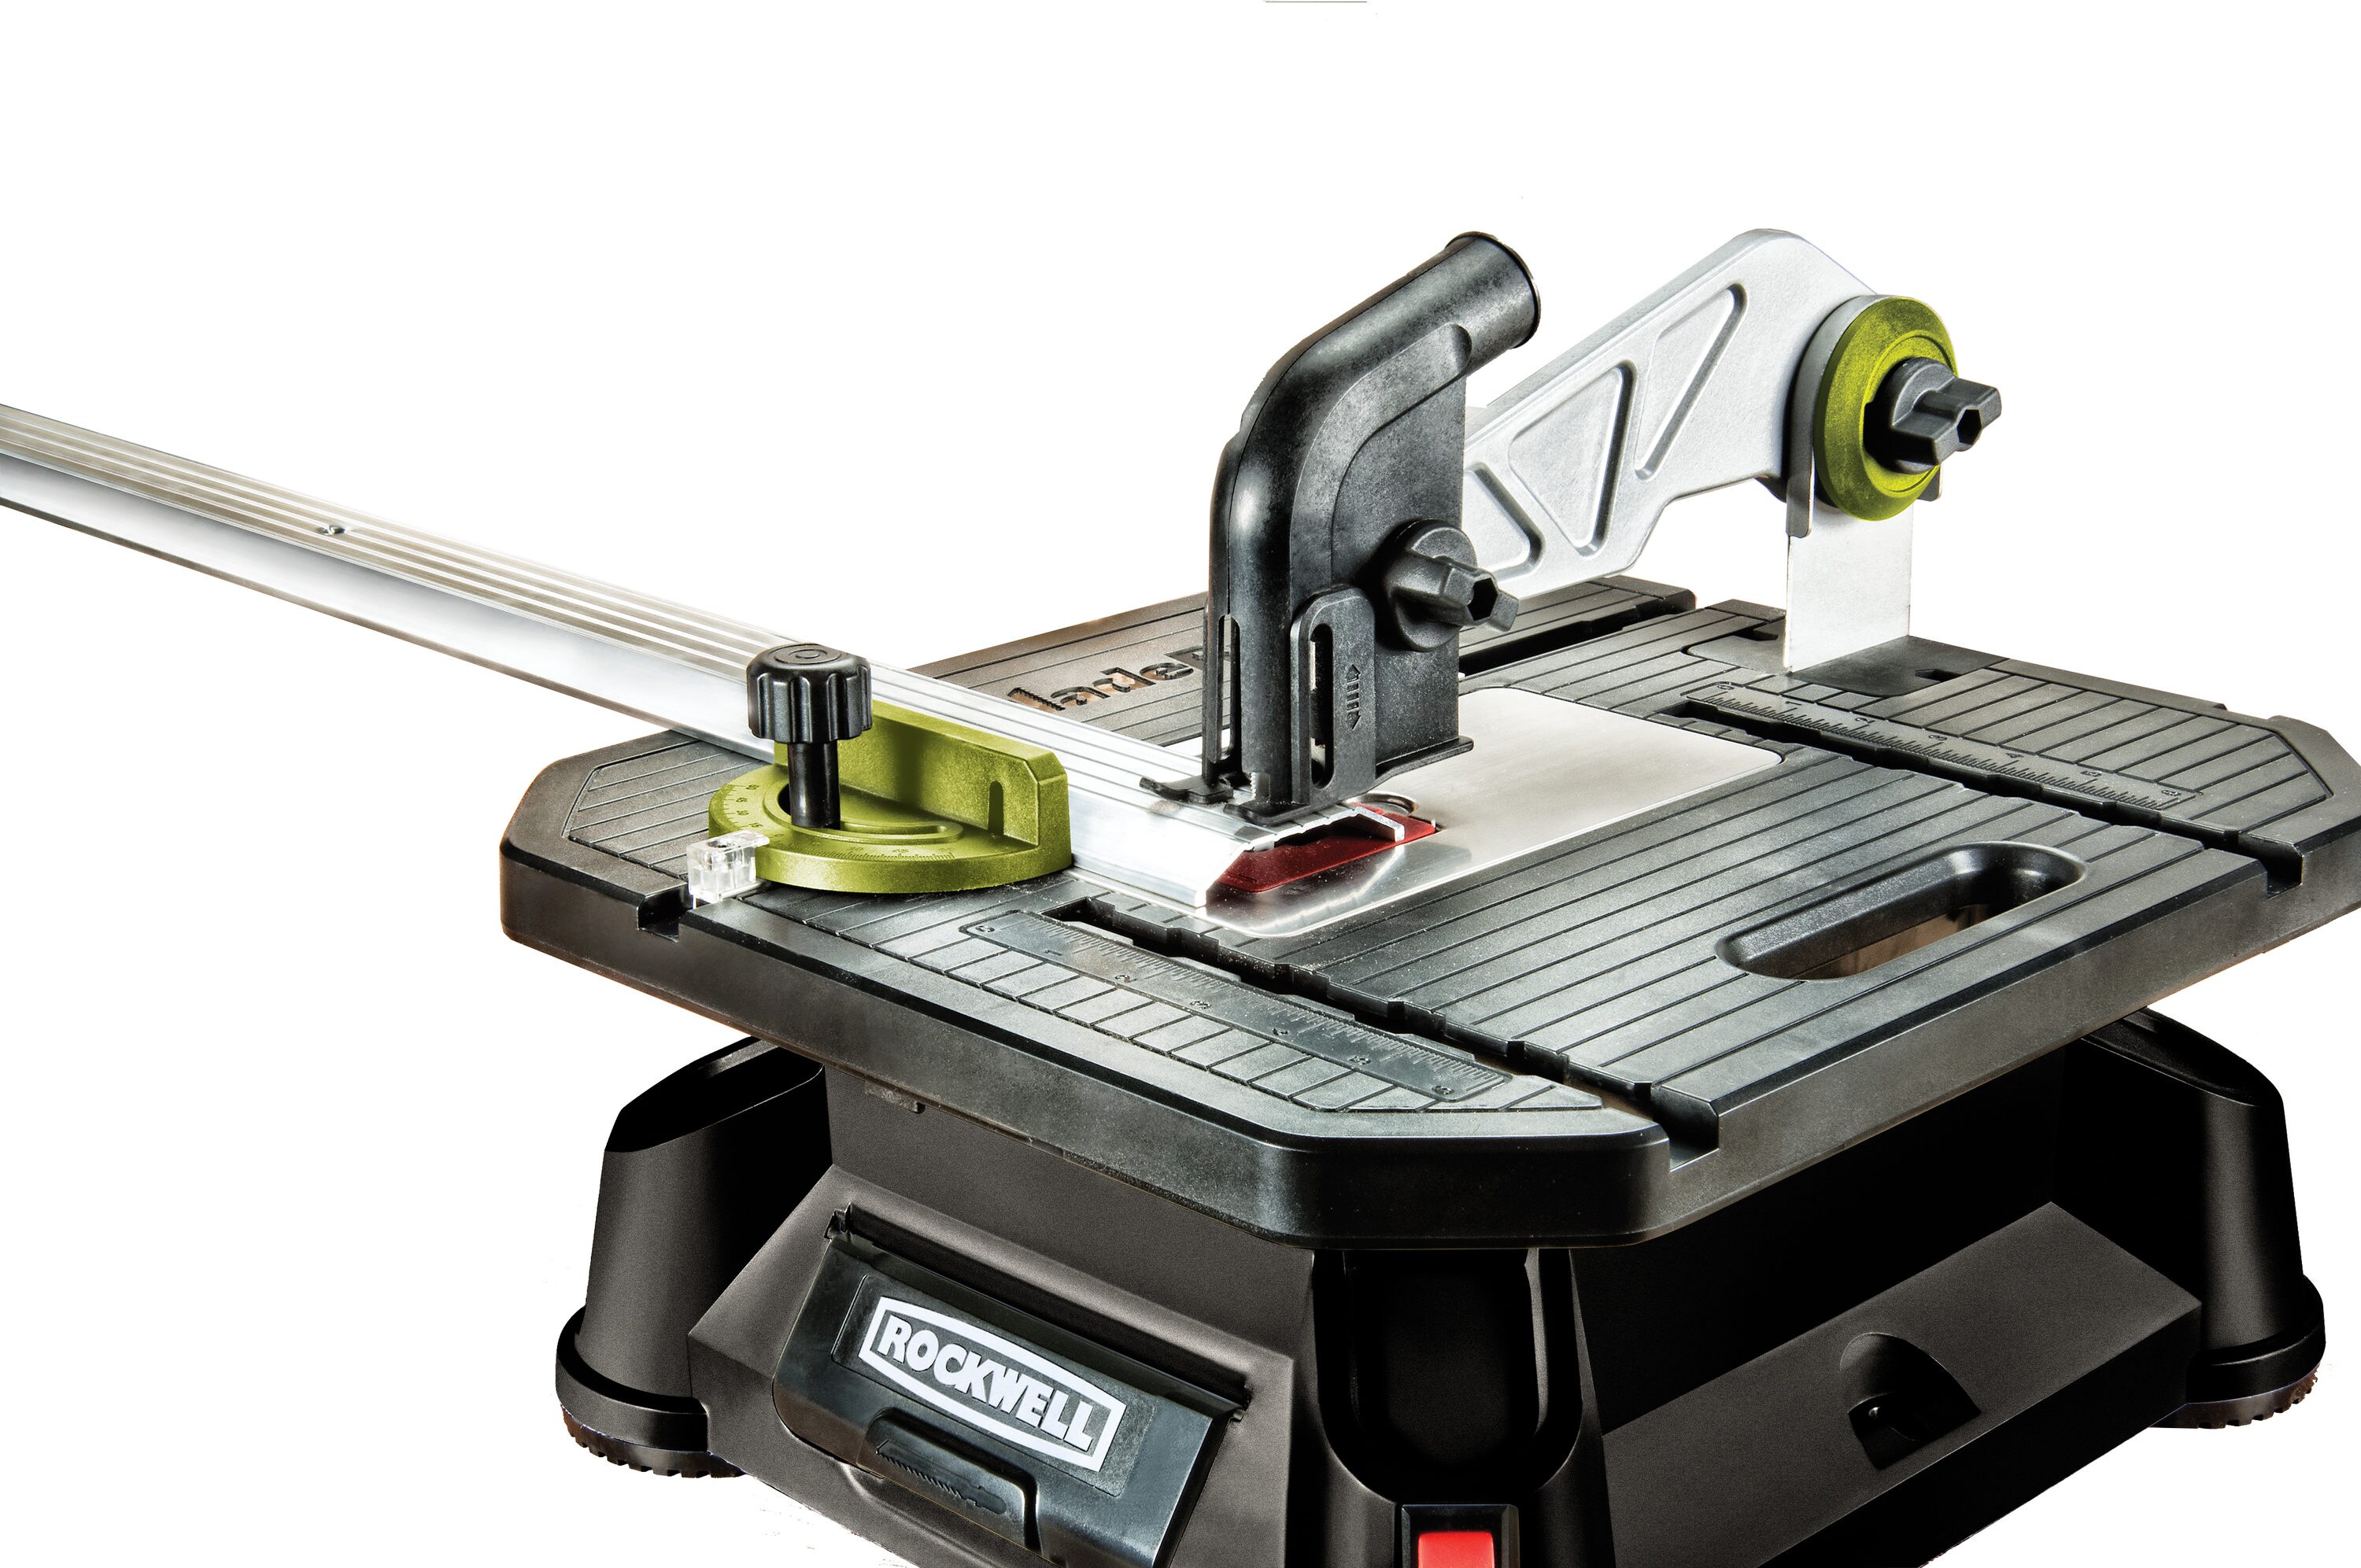 ROCKWELL Runner X2 4-in Carbon 5.5-Amp Portable Corded Table Saw